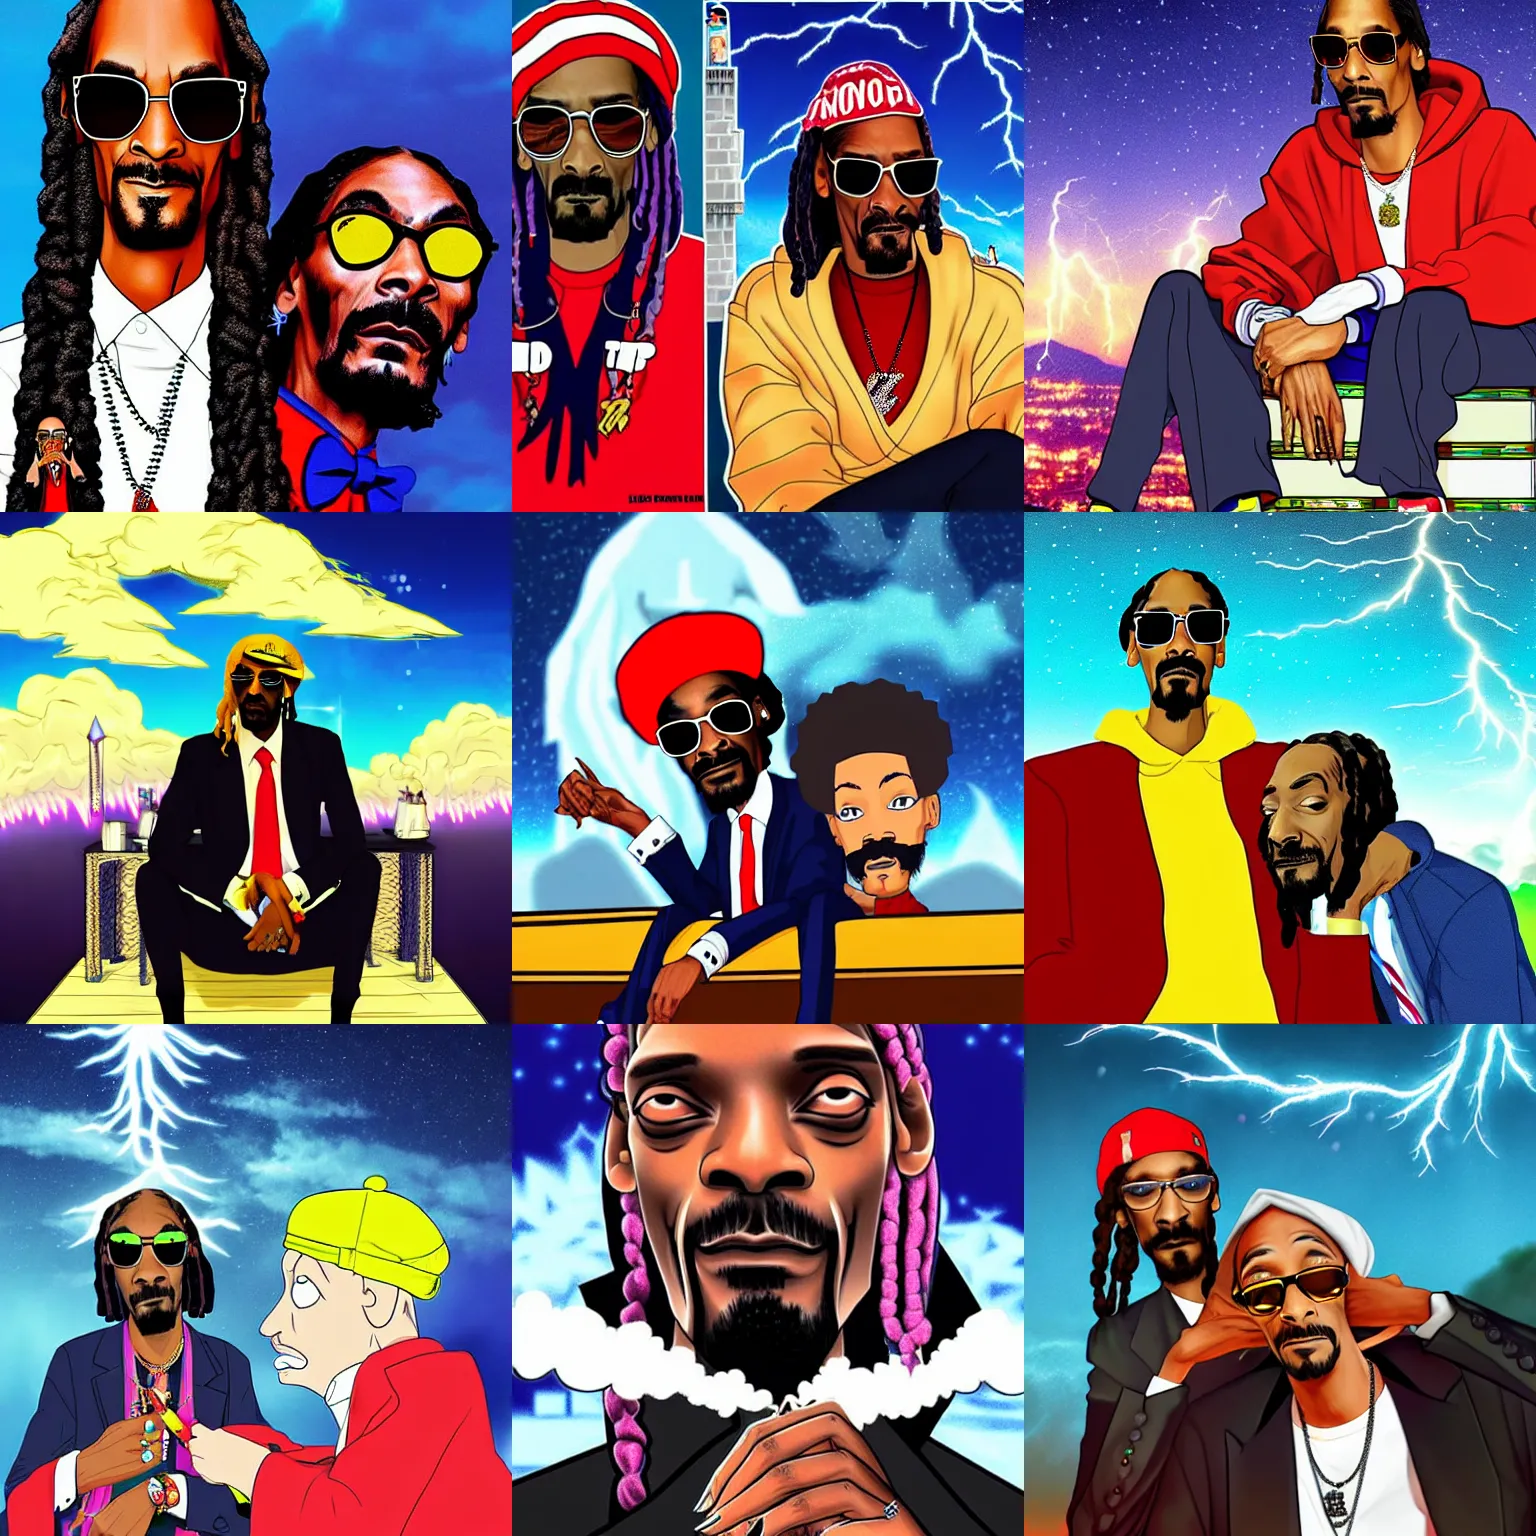 Prompt: snoop dogg getting high with donald trump, sitting on top of a large black tower during a cold winter night, lightning in the background, anime art style